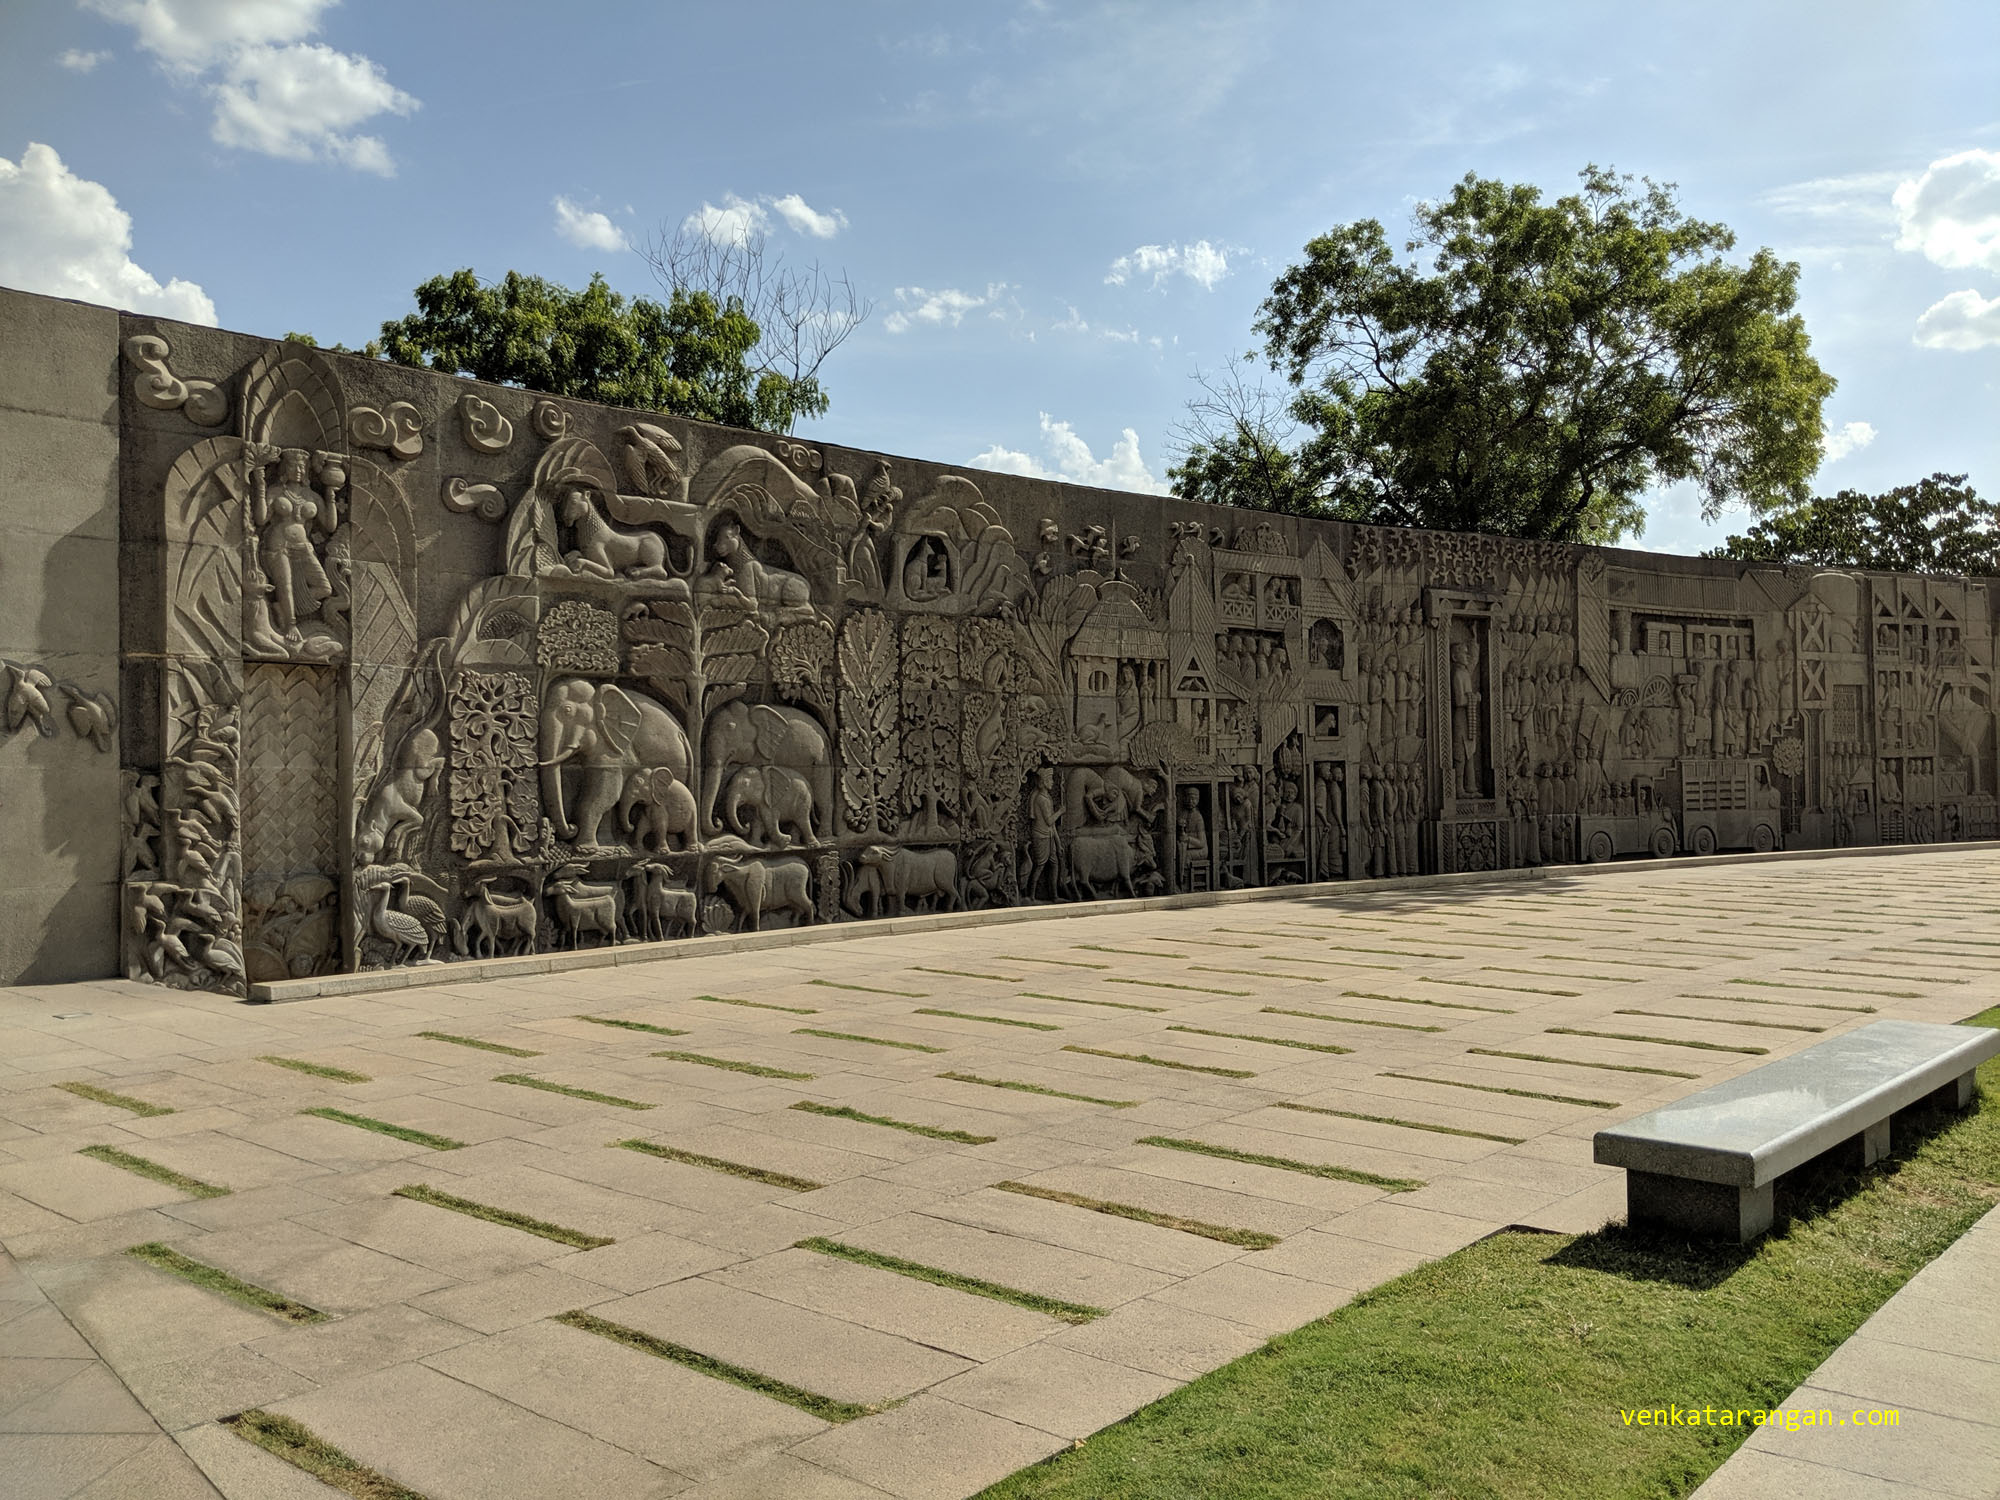 One section of the outer walls are covered with symbols representing animals, Indian culture and Mythology. 